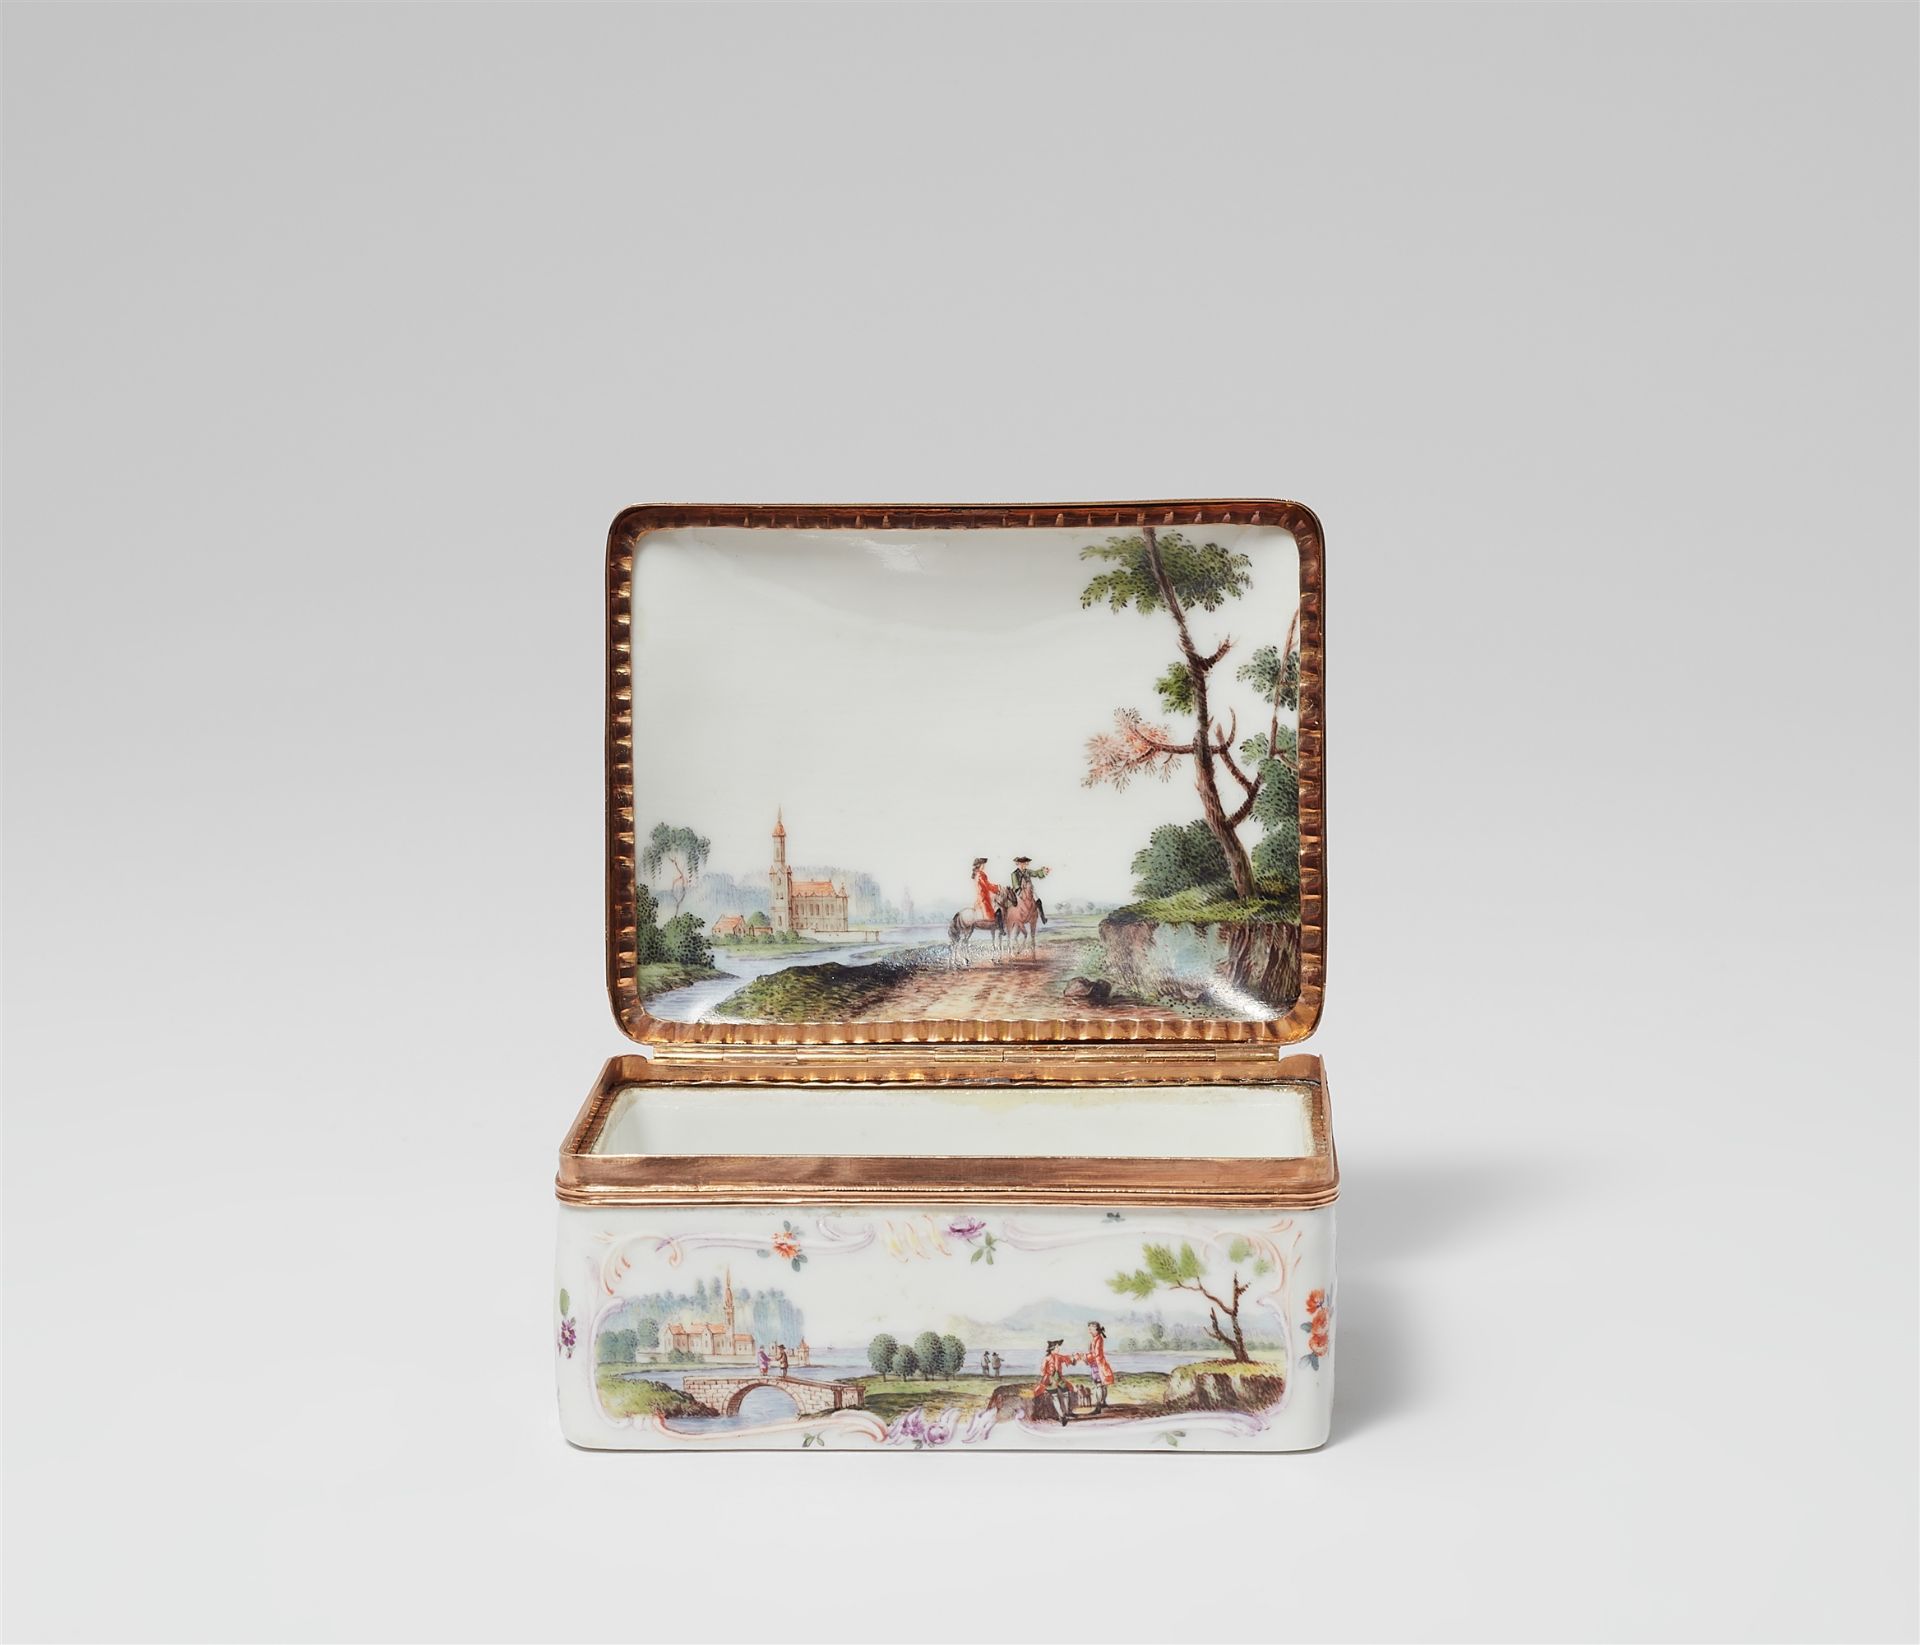 A Meissen porcelain snuff box with landscapes - Image 6 of 9